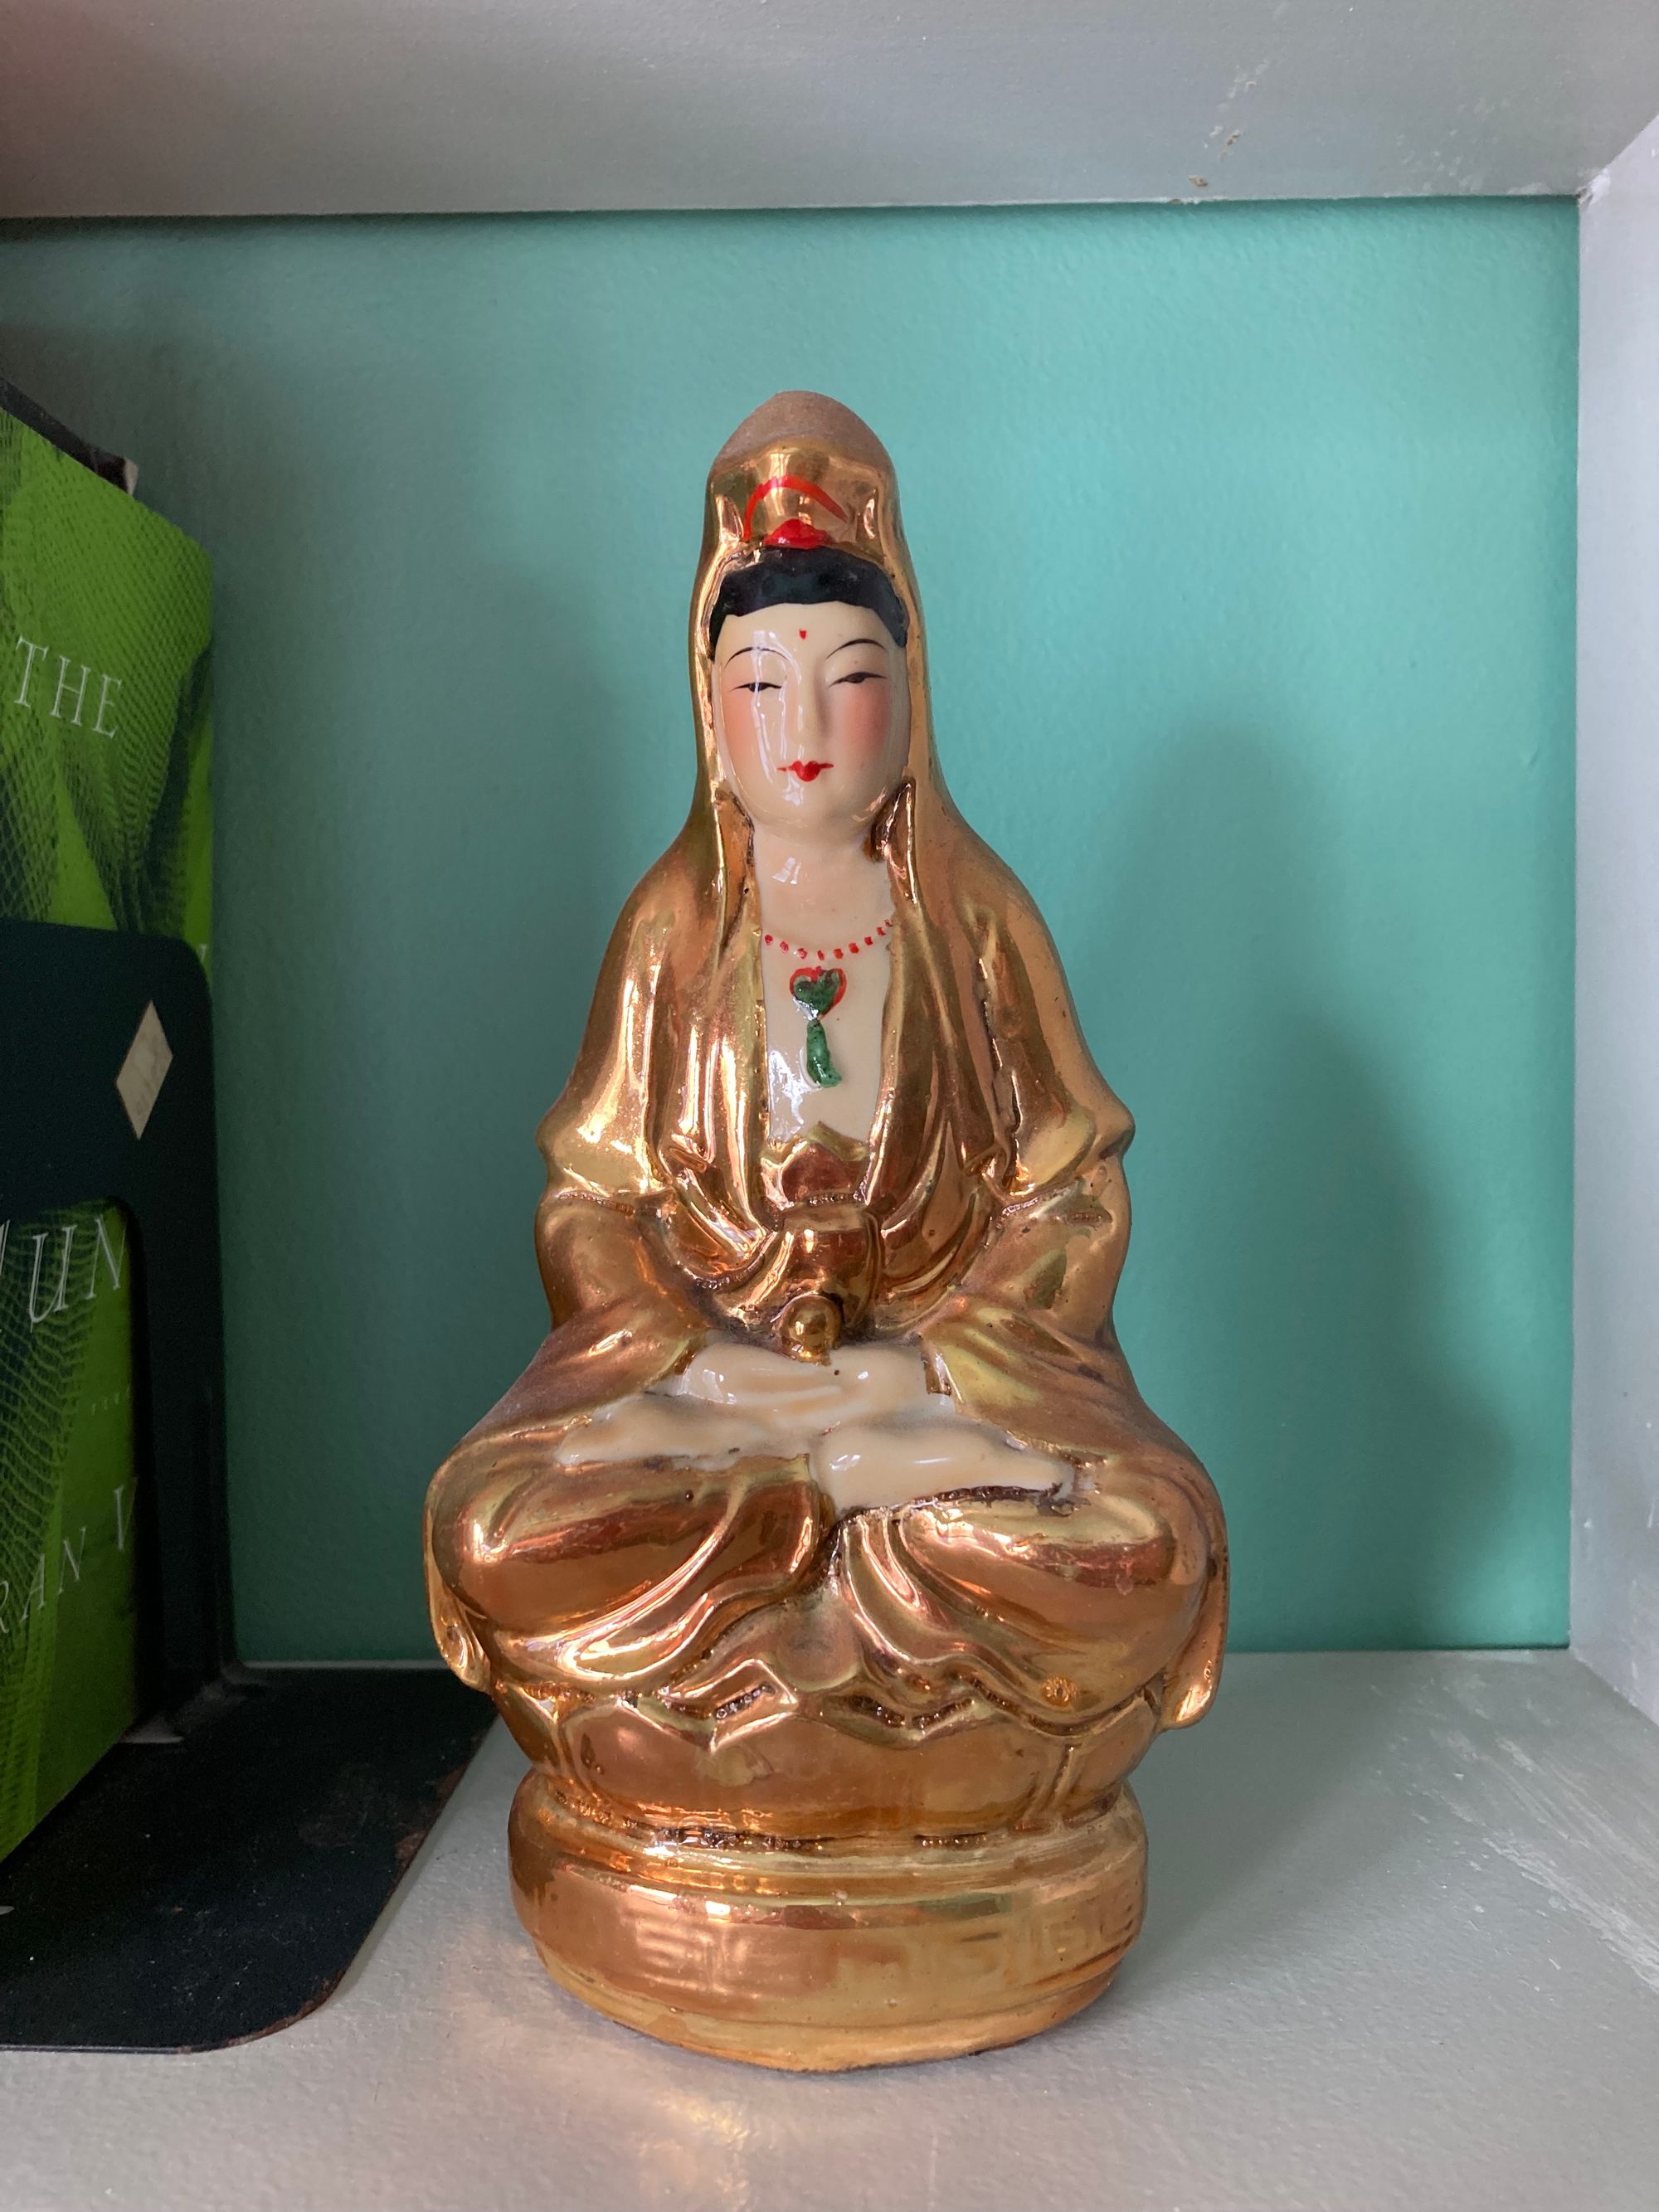 A small, colorful figurine of a the Guan Yin